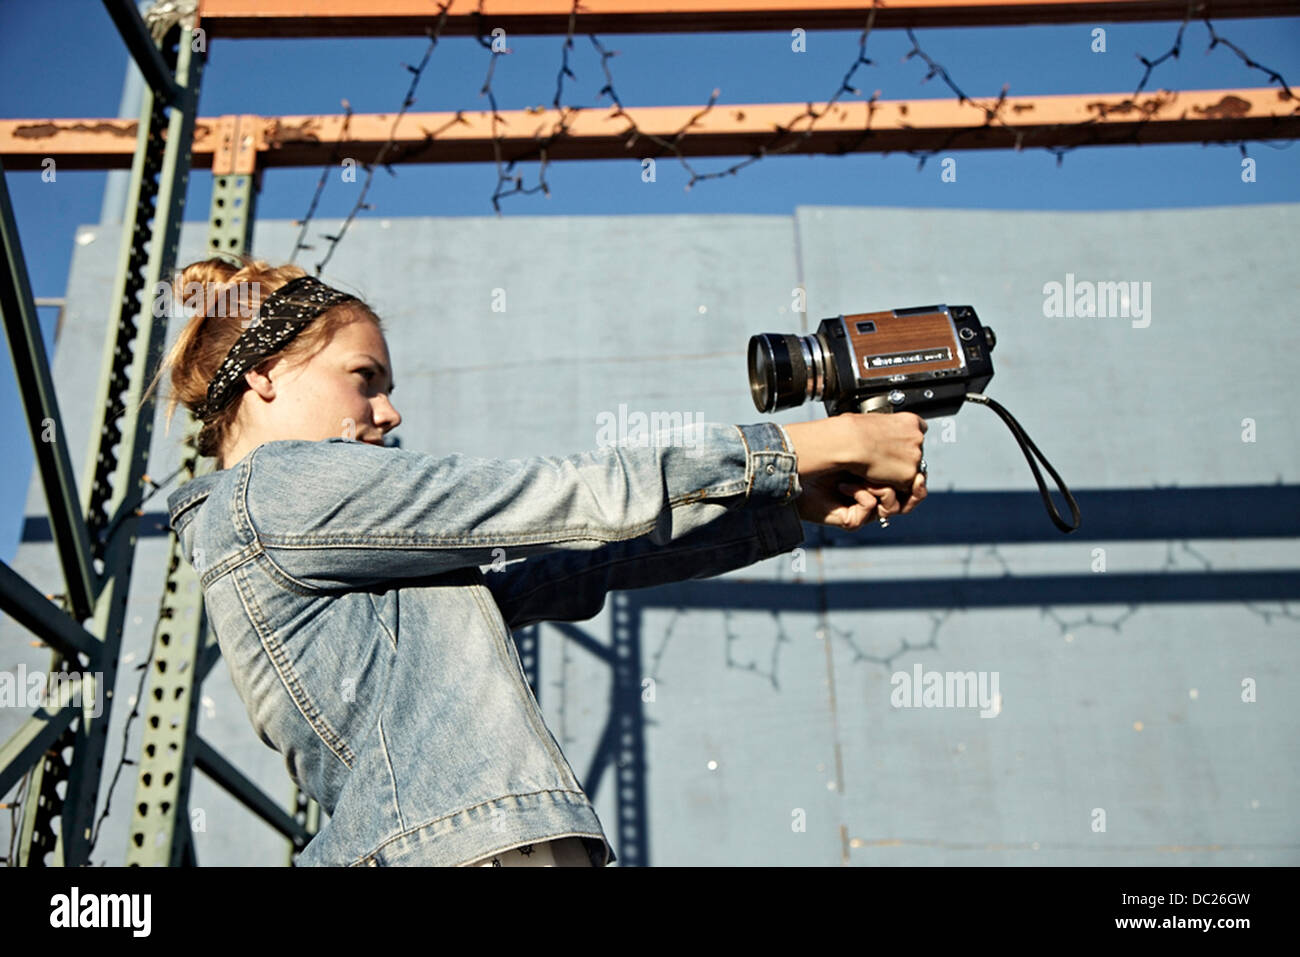 Woman using old video camera to take self portrait Stock Photo